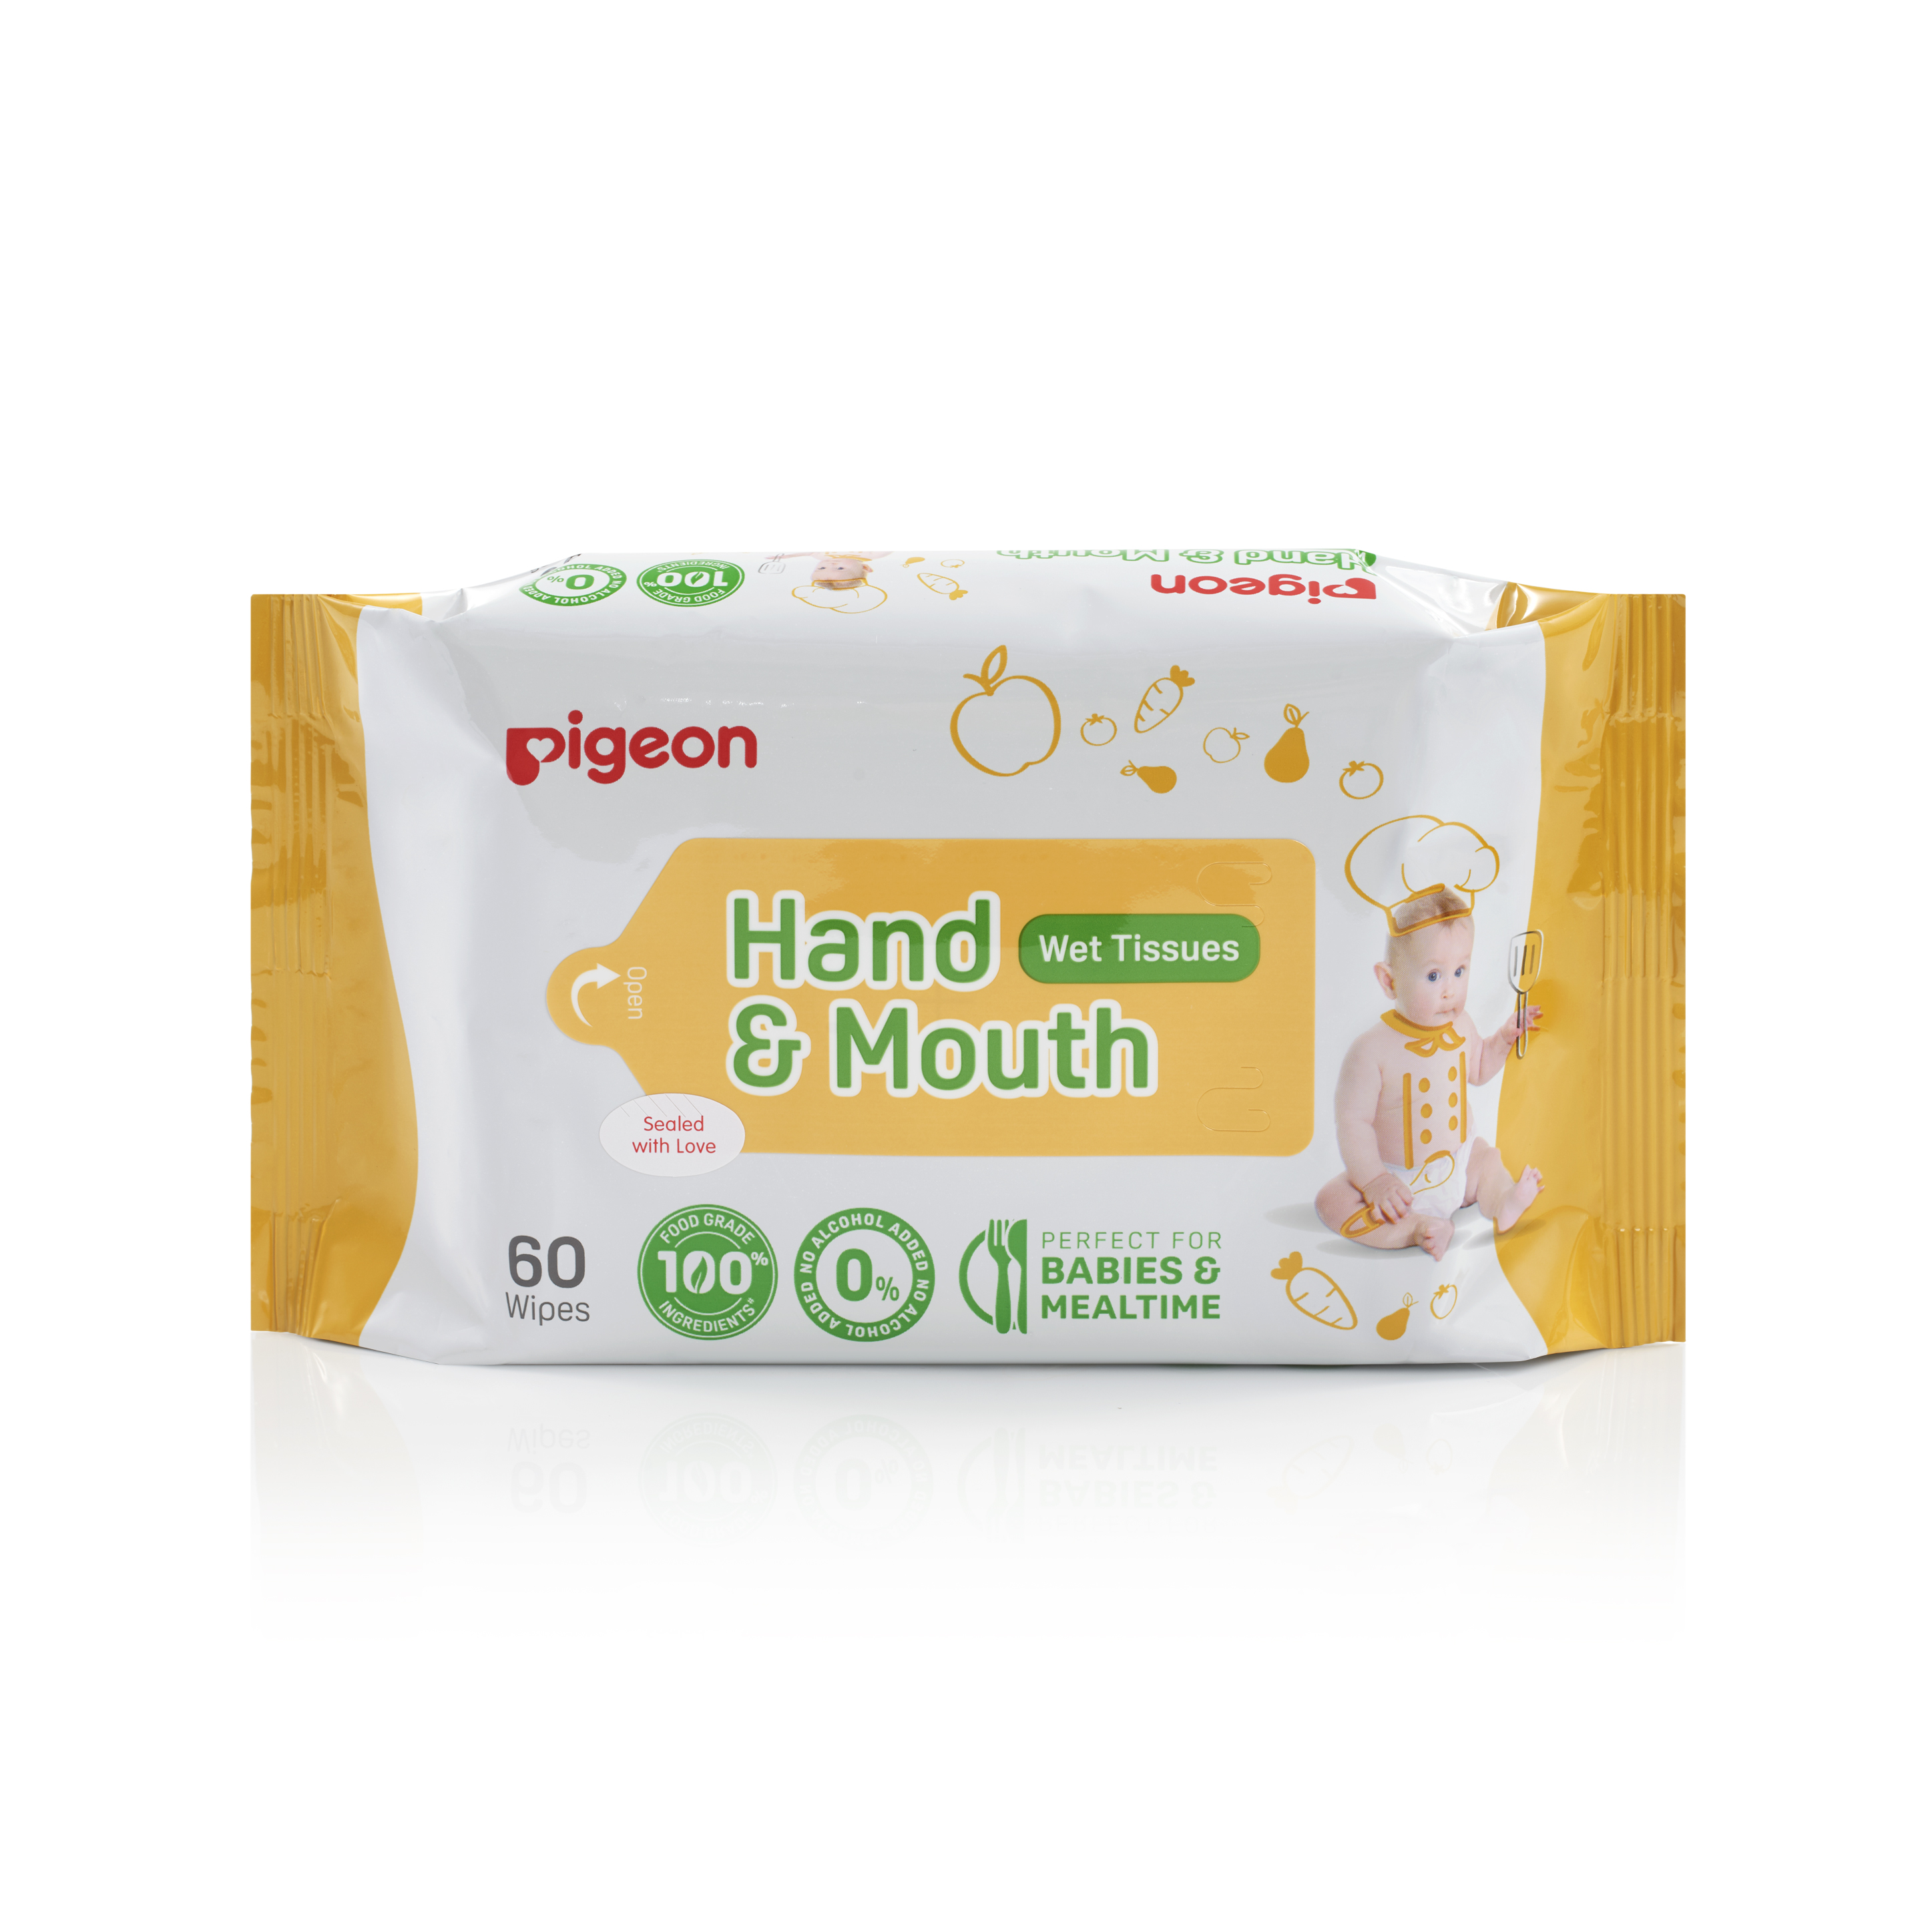 Pigeon Hand & Mouth Wet Tissues 60S 2 In 1 Pack (PG-79508S)